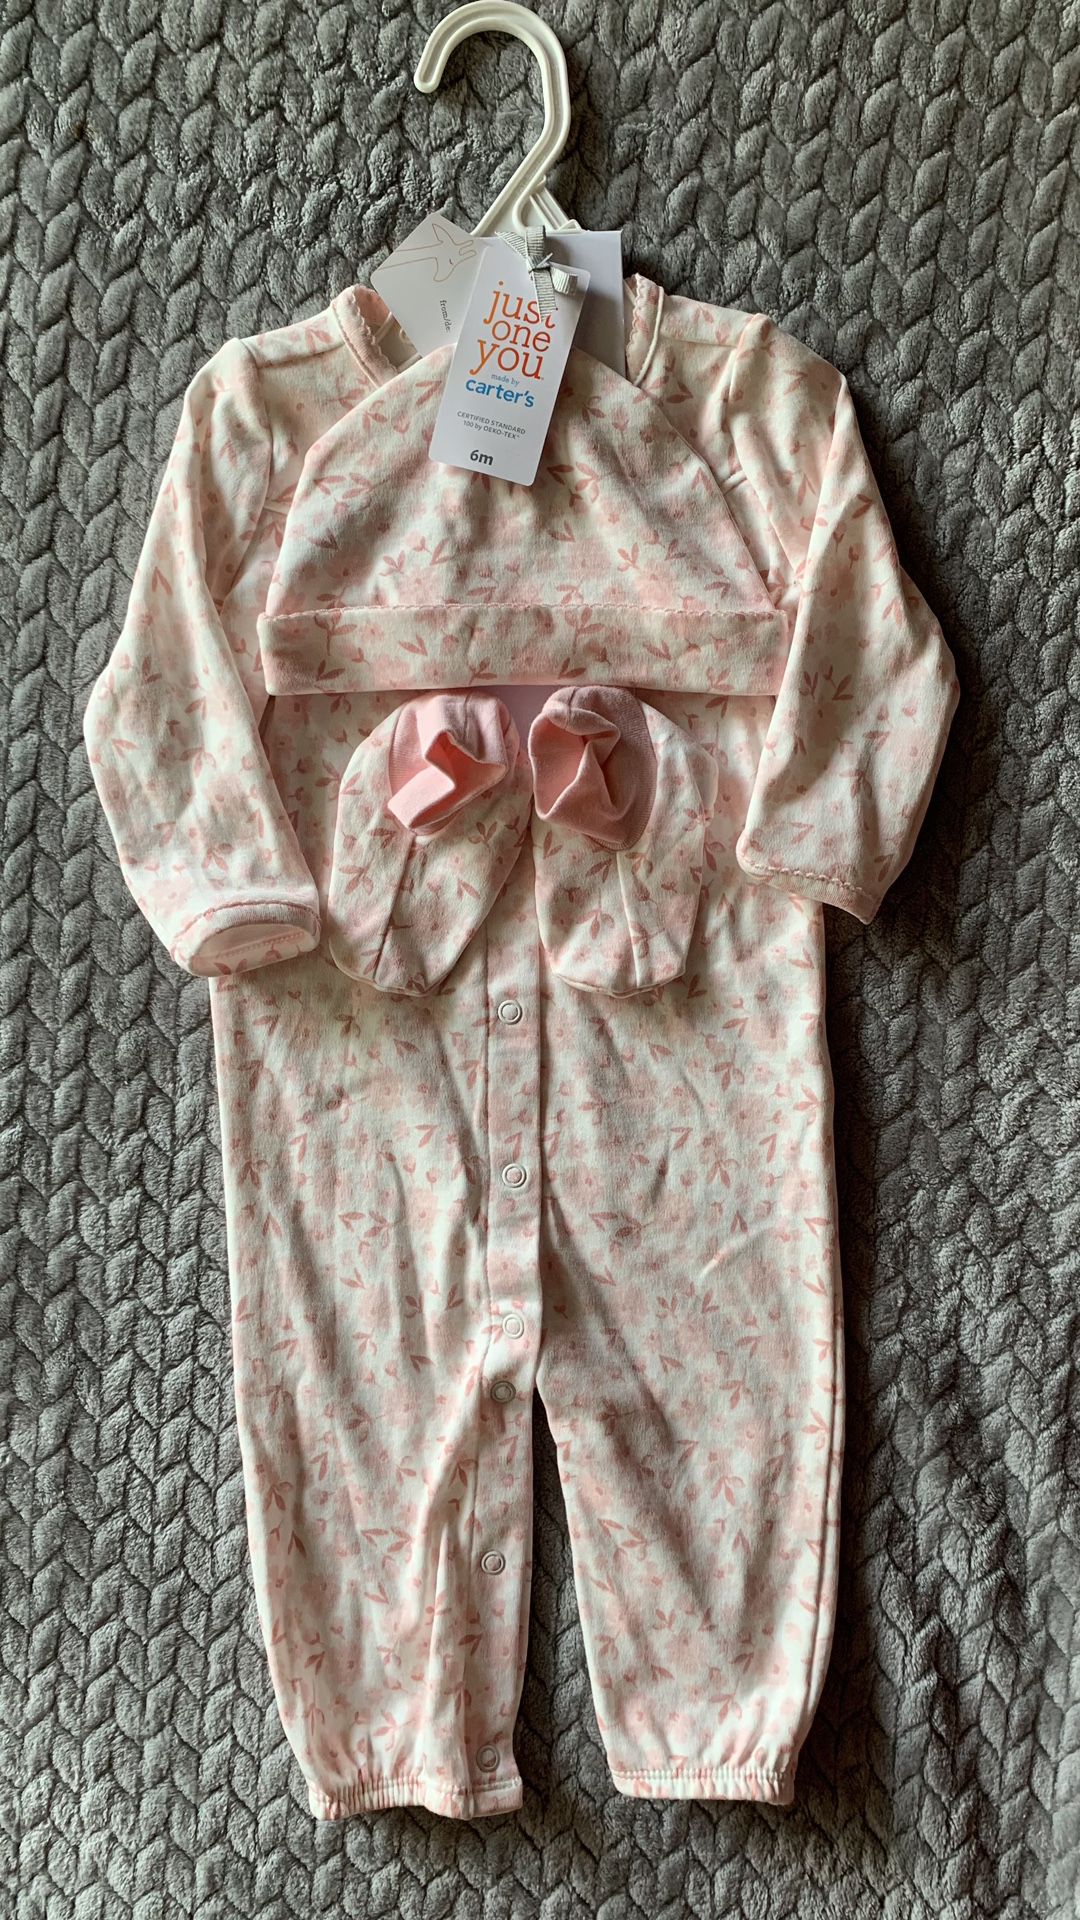 NEW Pink Floral Sleep 3 Piece Set with Booties and Hat from Carters in 6M